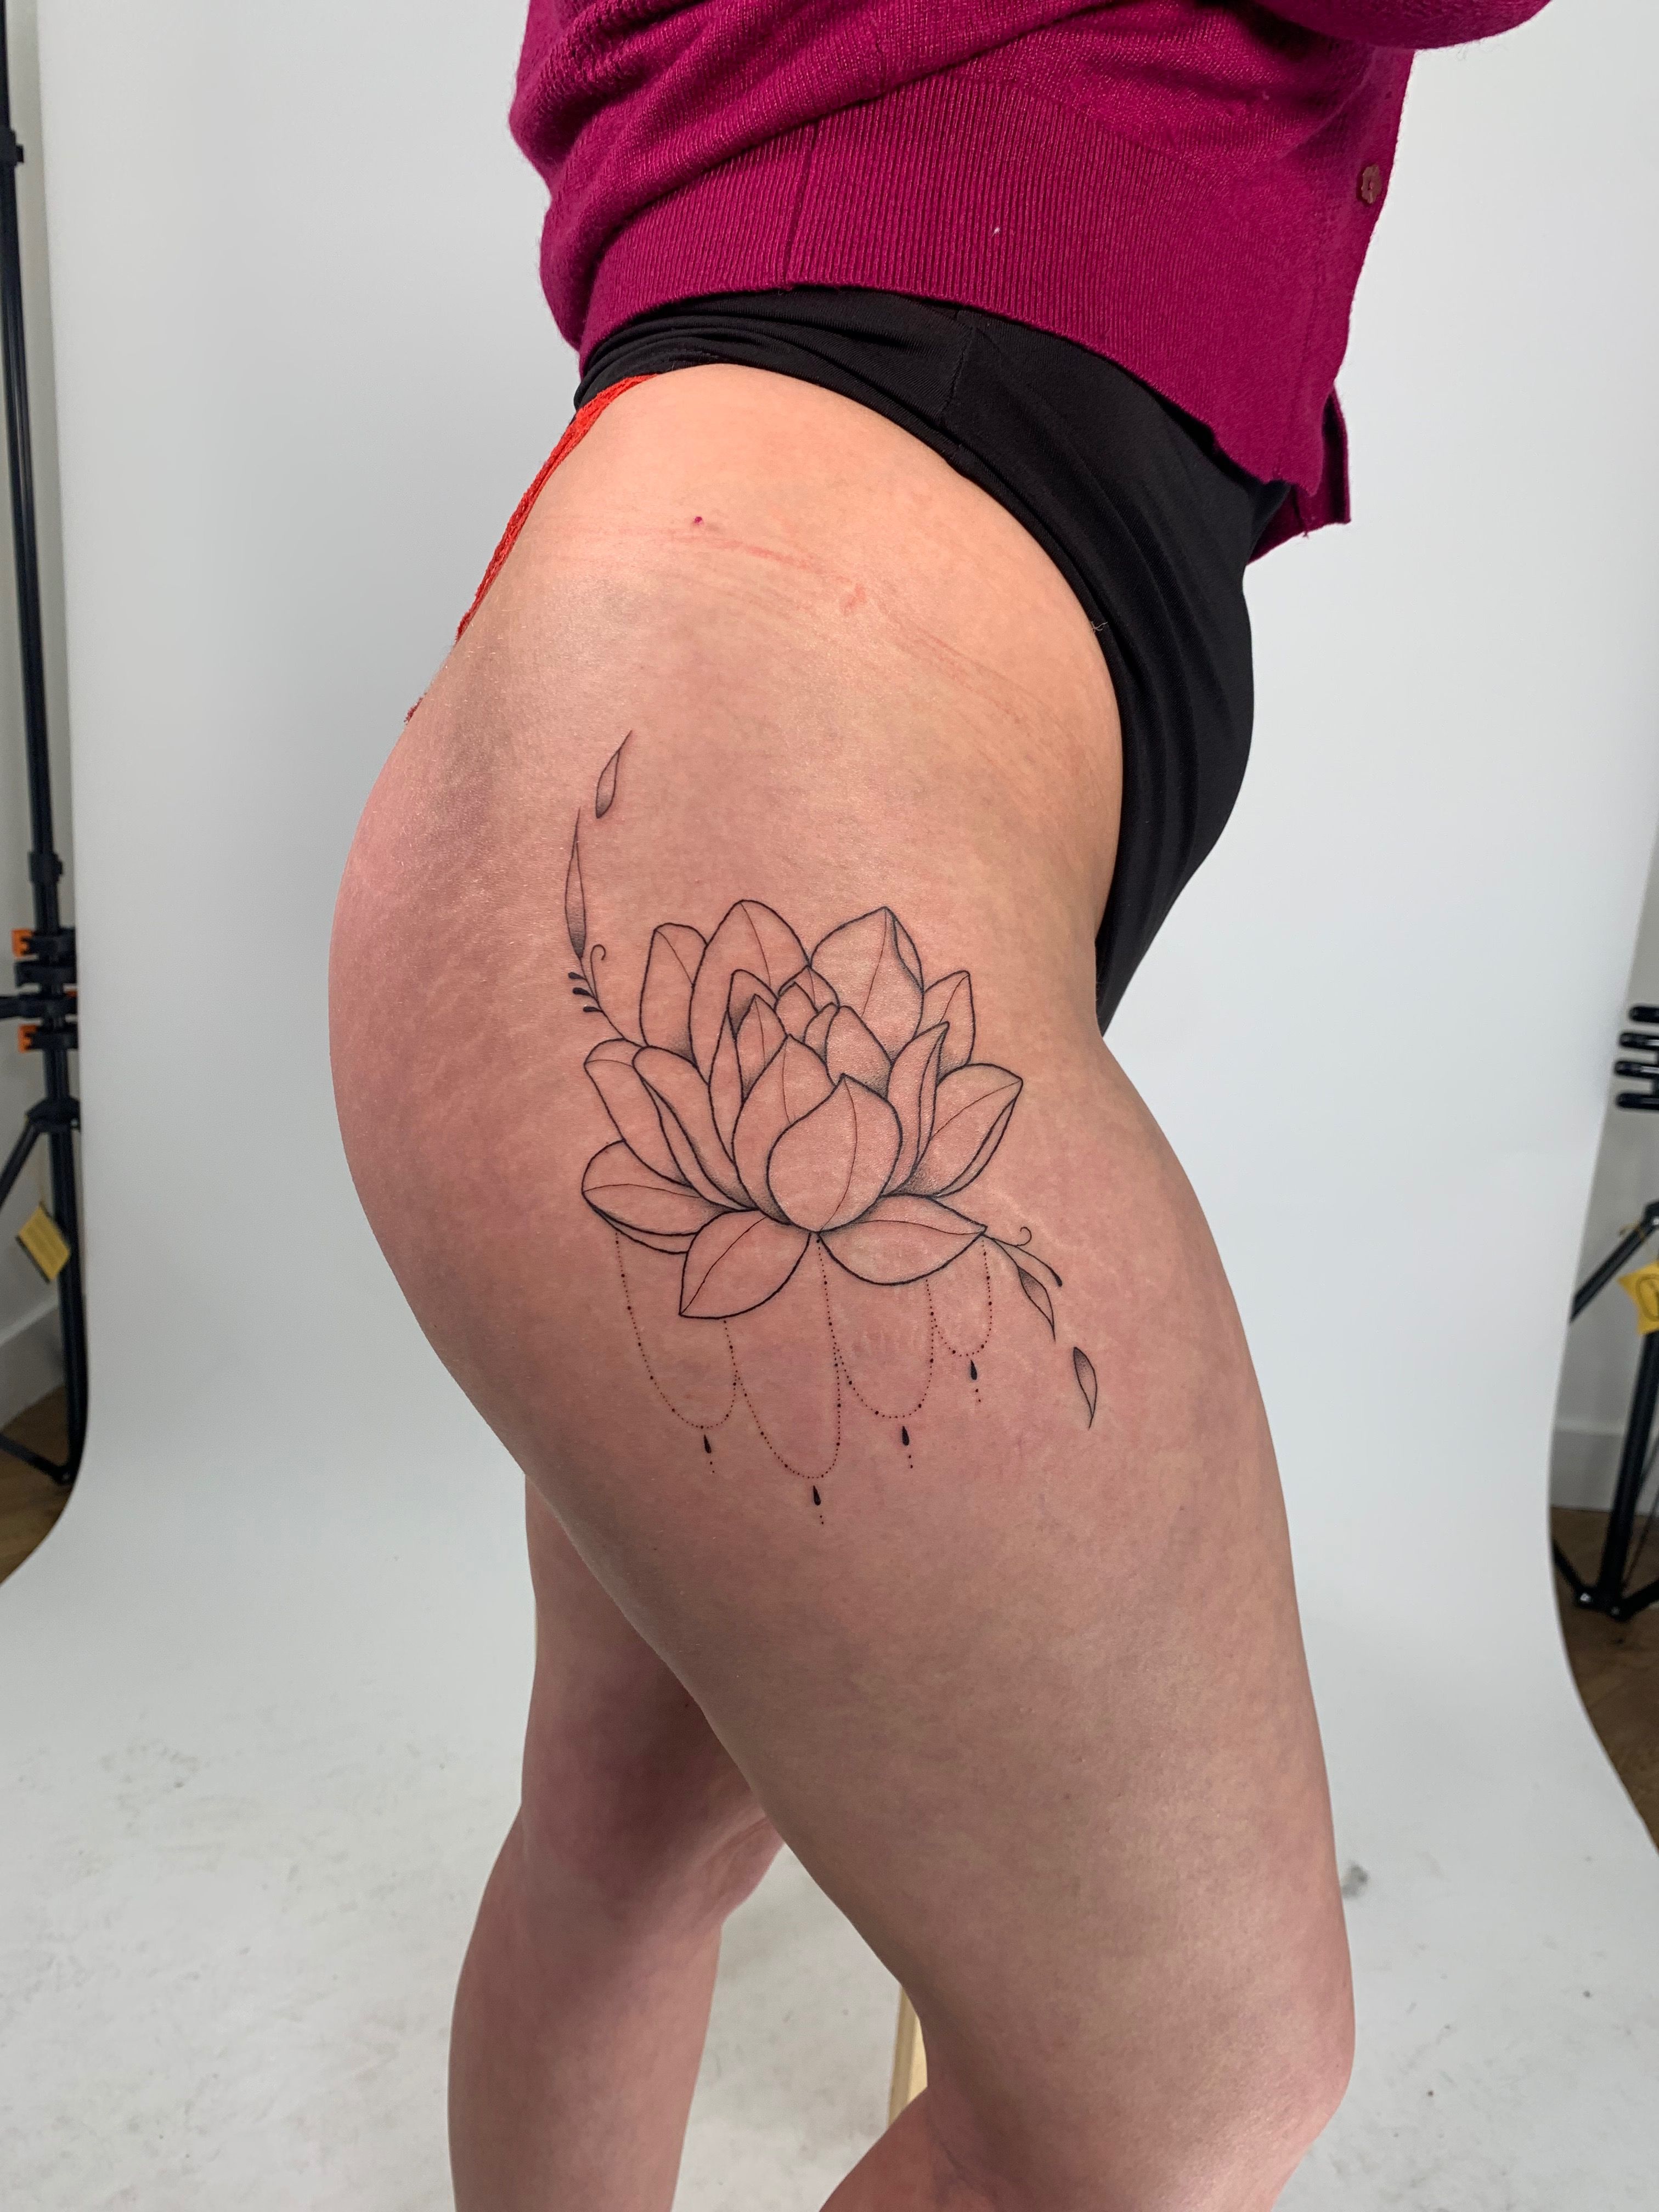 Lotus | Ankle tattoo designs, Ankle tattoos for women, Ankle tattoos